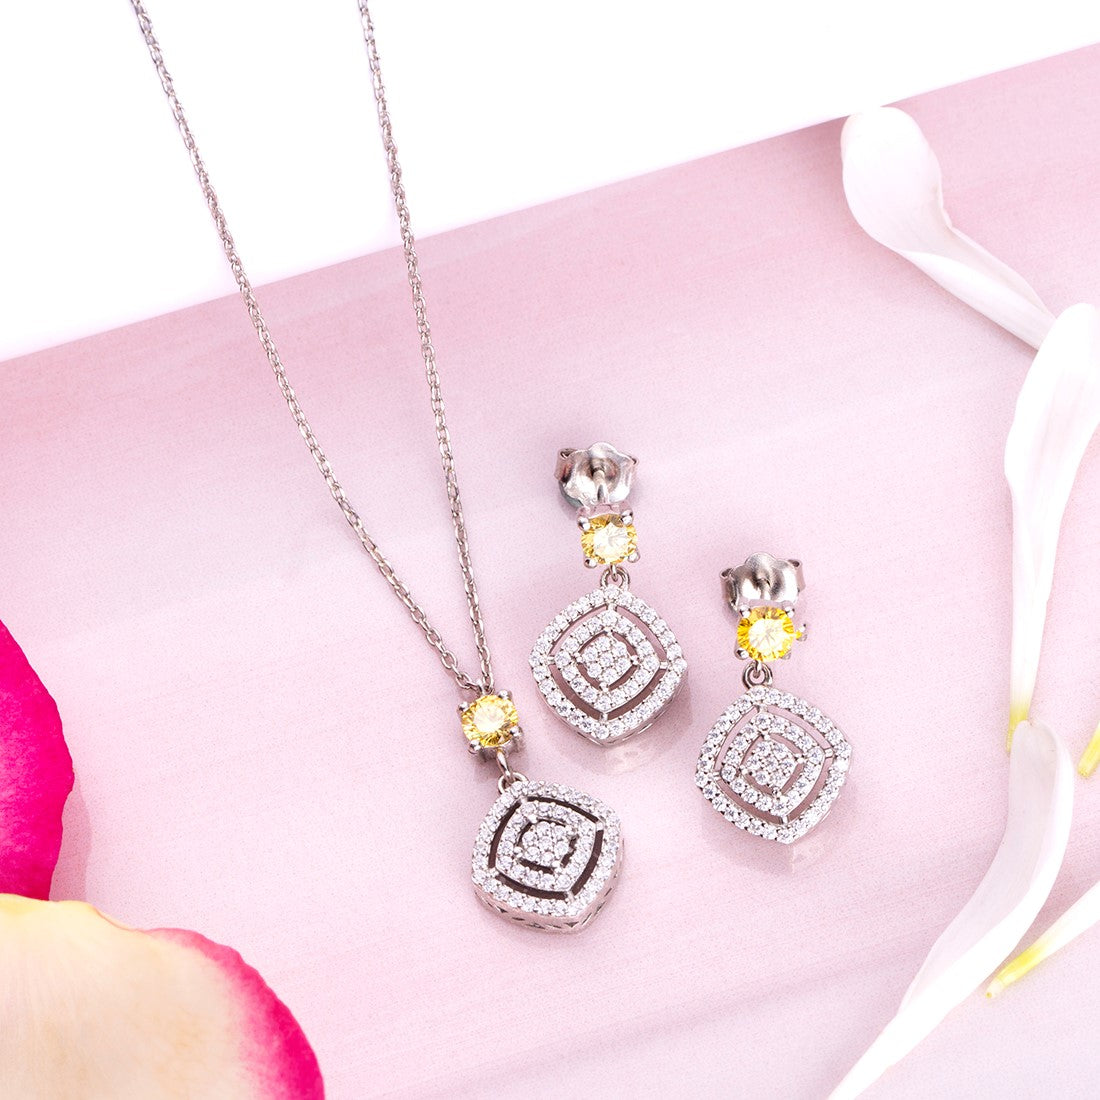 Timeless Elegance 925 Sterling Silver Rhodium-Plated Square Jewellery Set